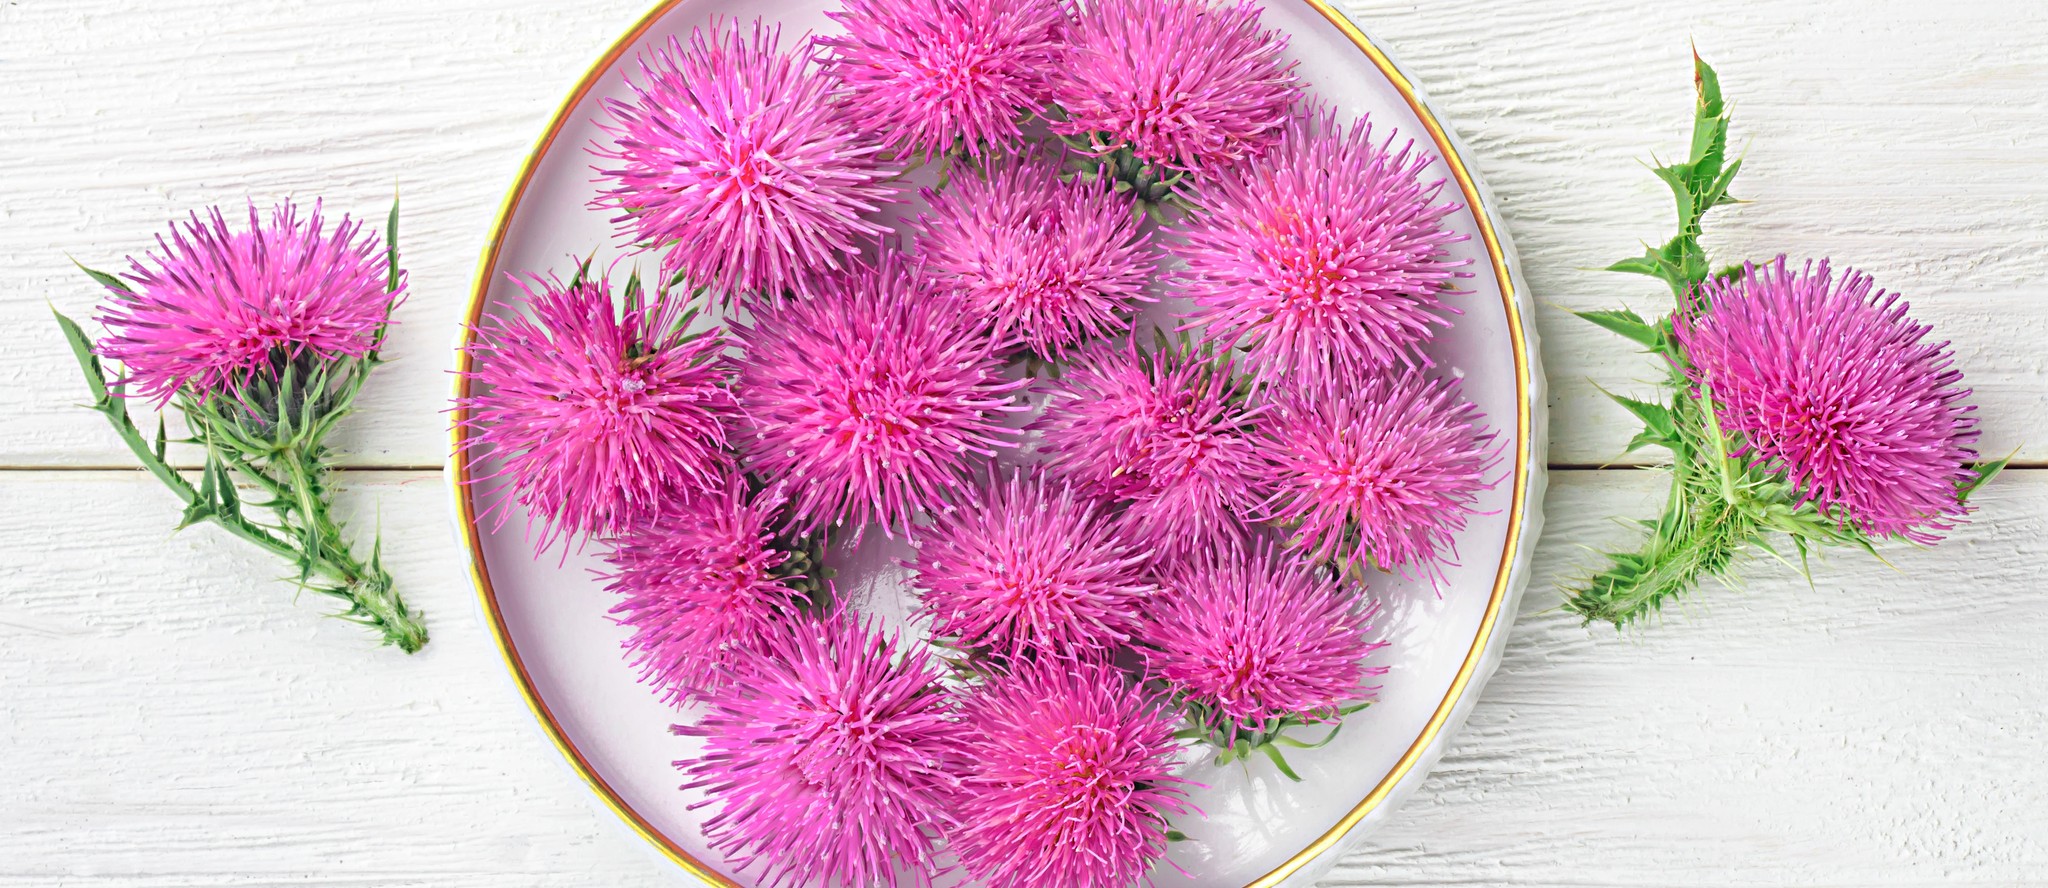 Milk Thistle flowers in white shallow bowl with one milk thistle flower on each side of the bowl